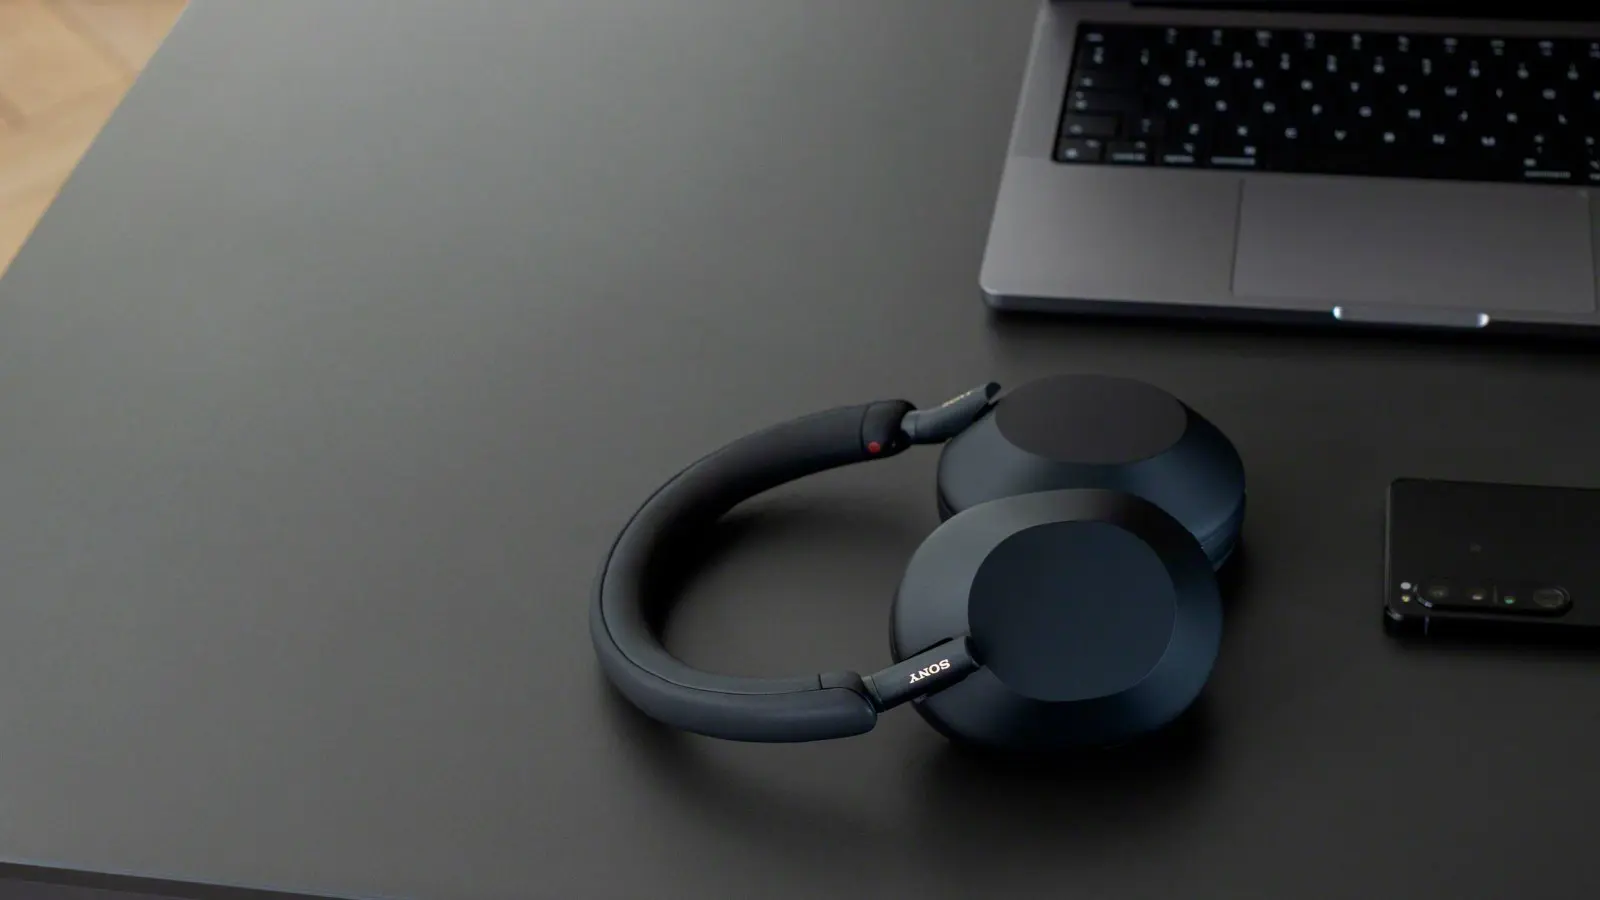 sony wh-1000xm5 headphones in black laid on a table near a laptop and phone